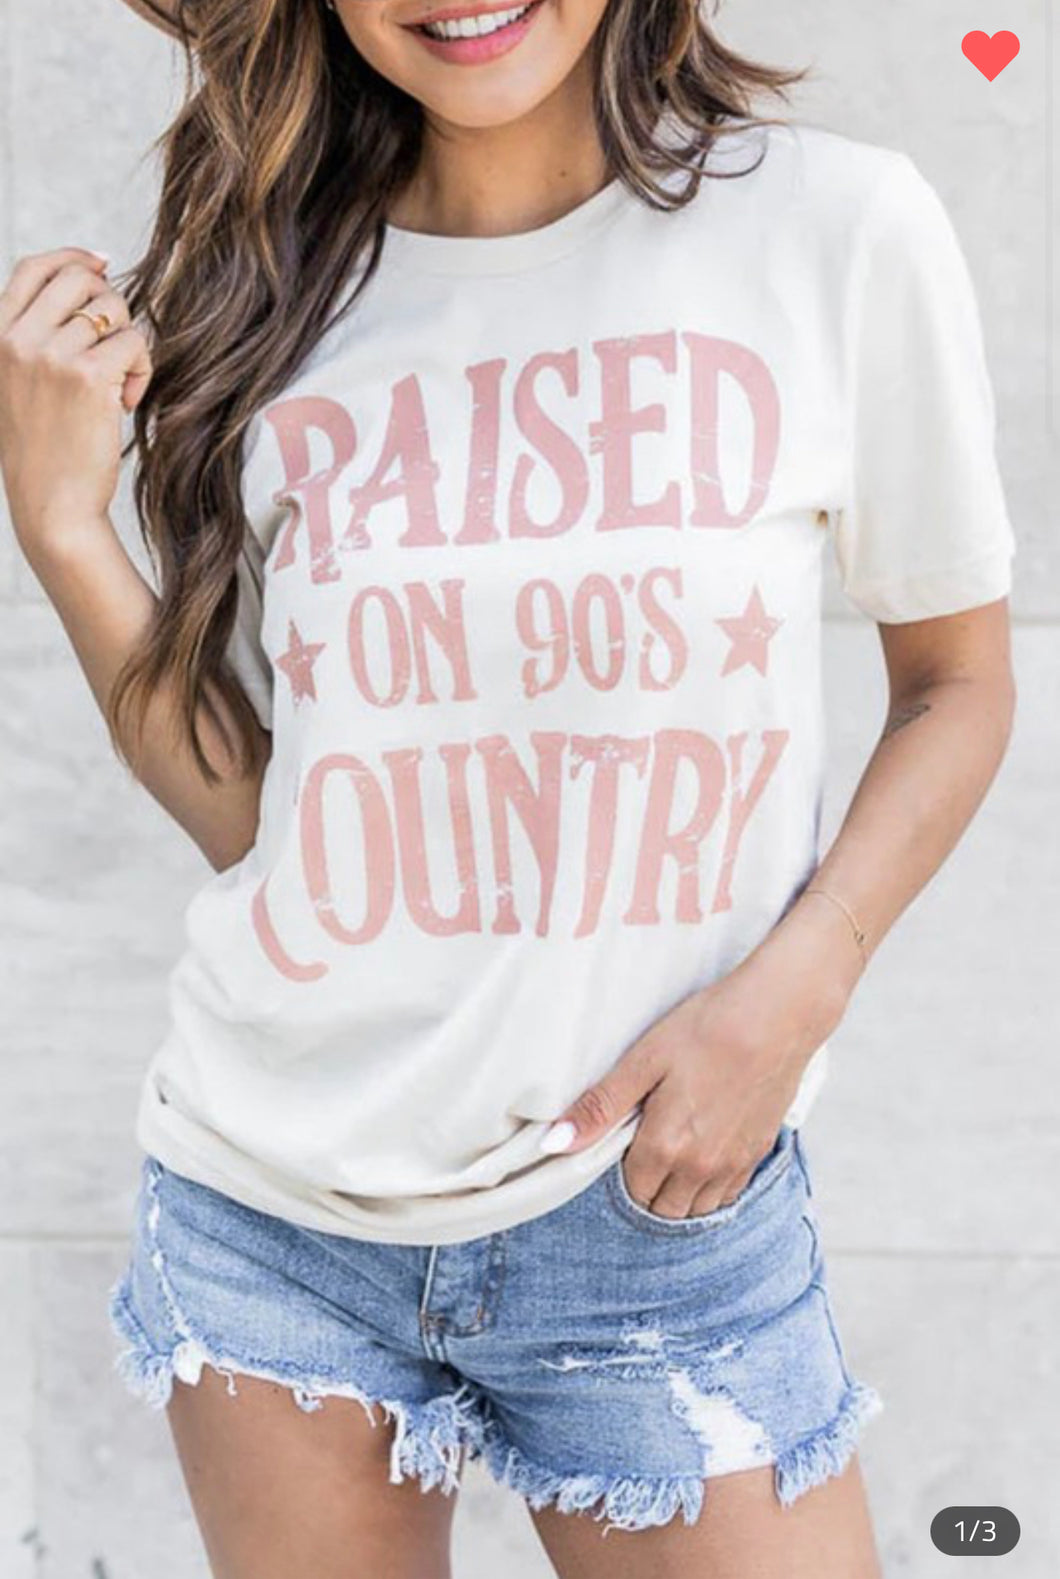 Raised On 90s Country